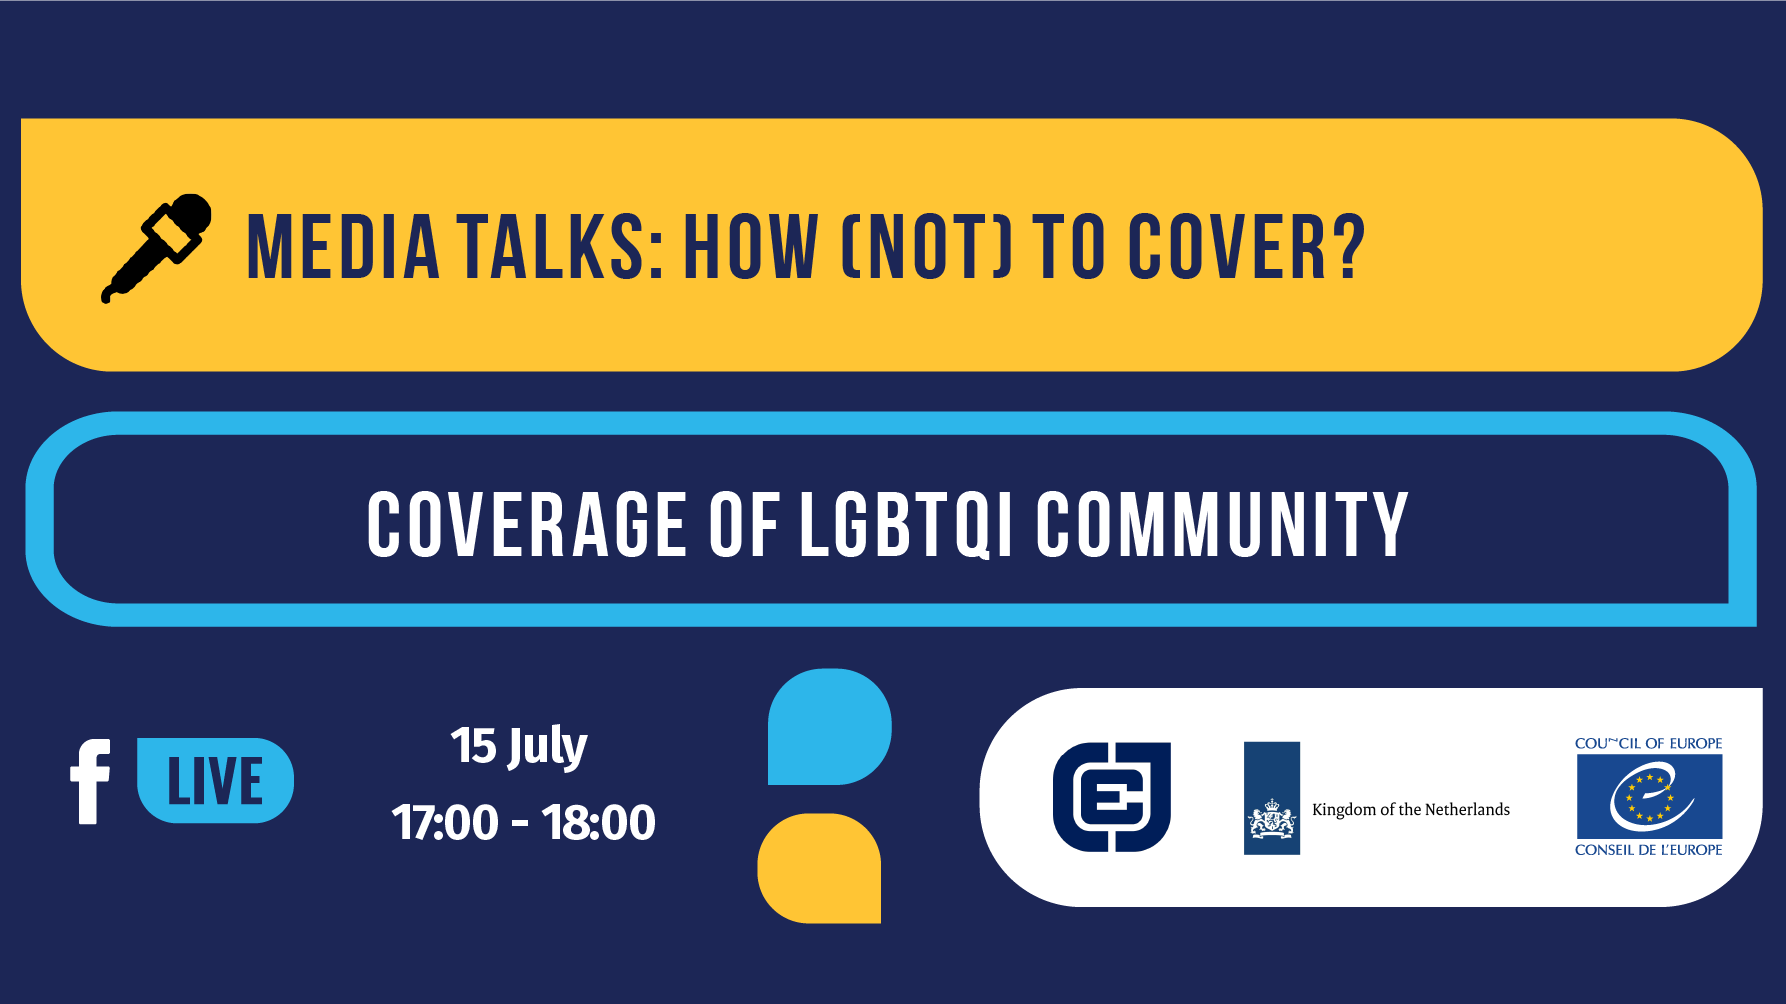 Media Talks: How (not) to cover? Continue: next topic – LGBTQI community coverage